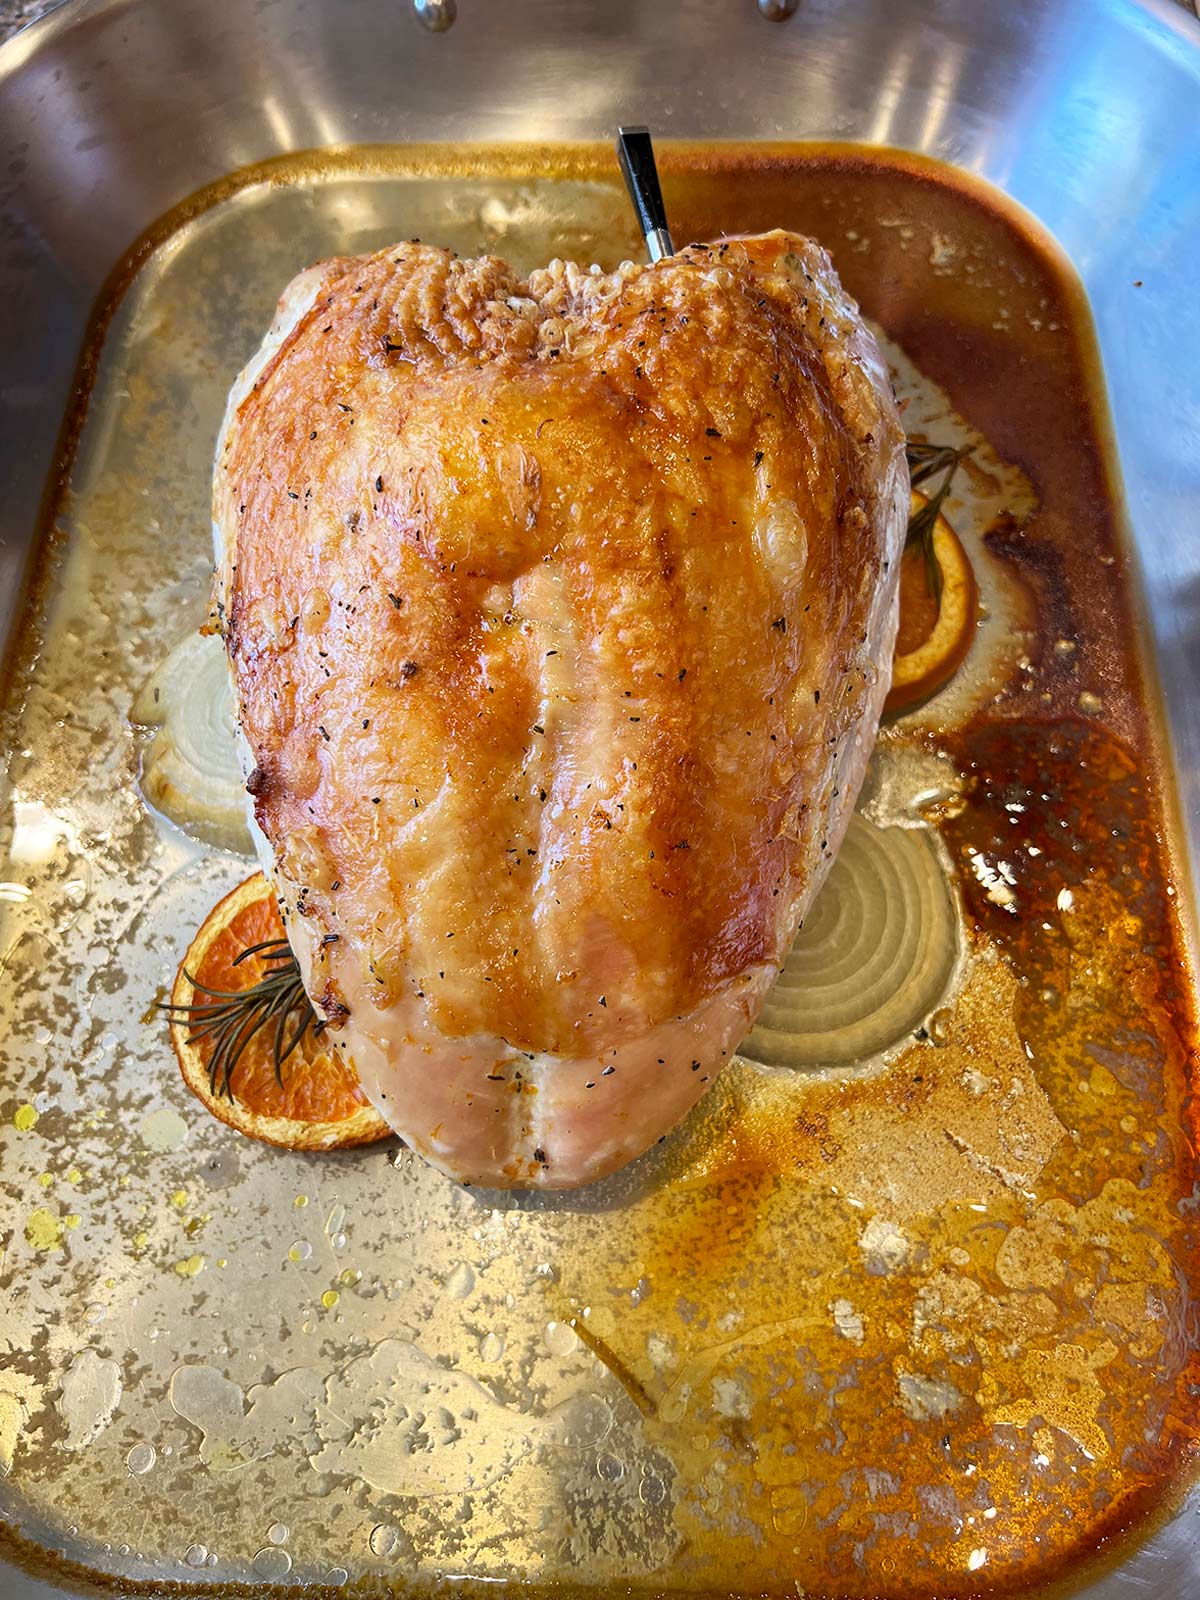 Turkey breast roasted in pan but out of the oven with the probe still inserted.